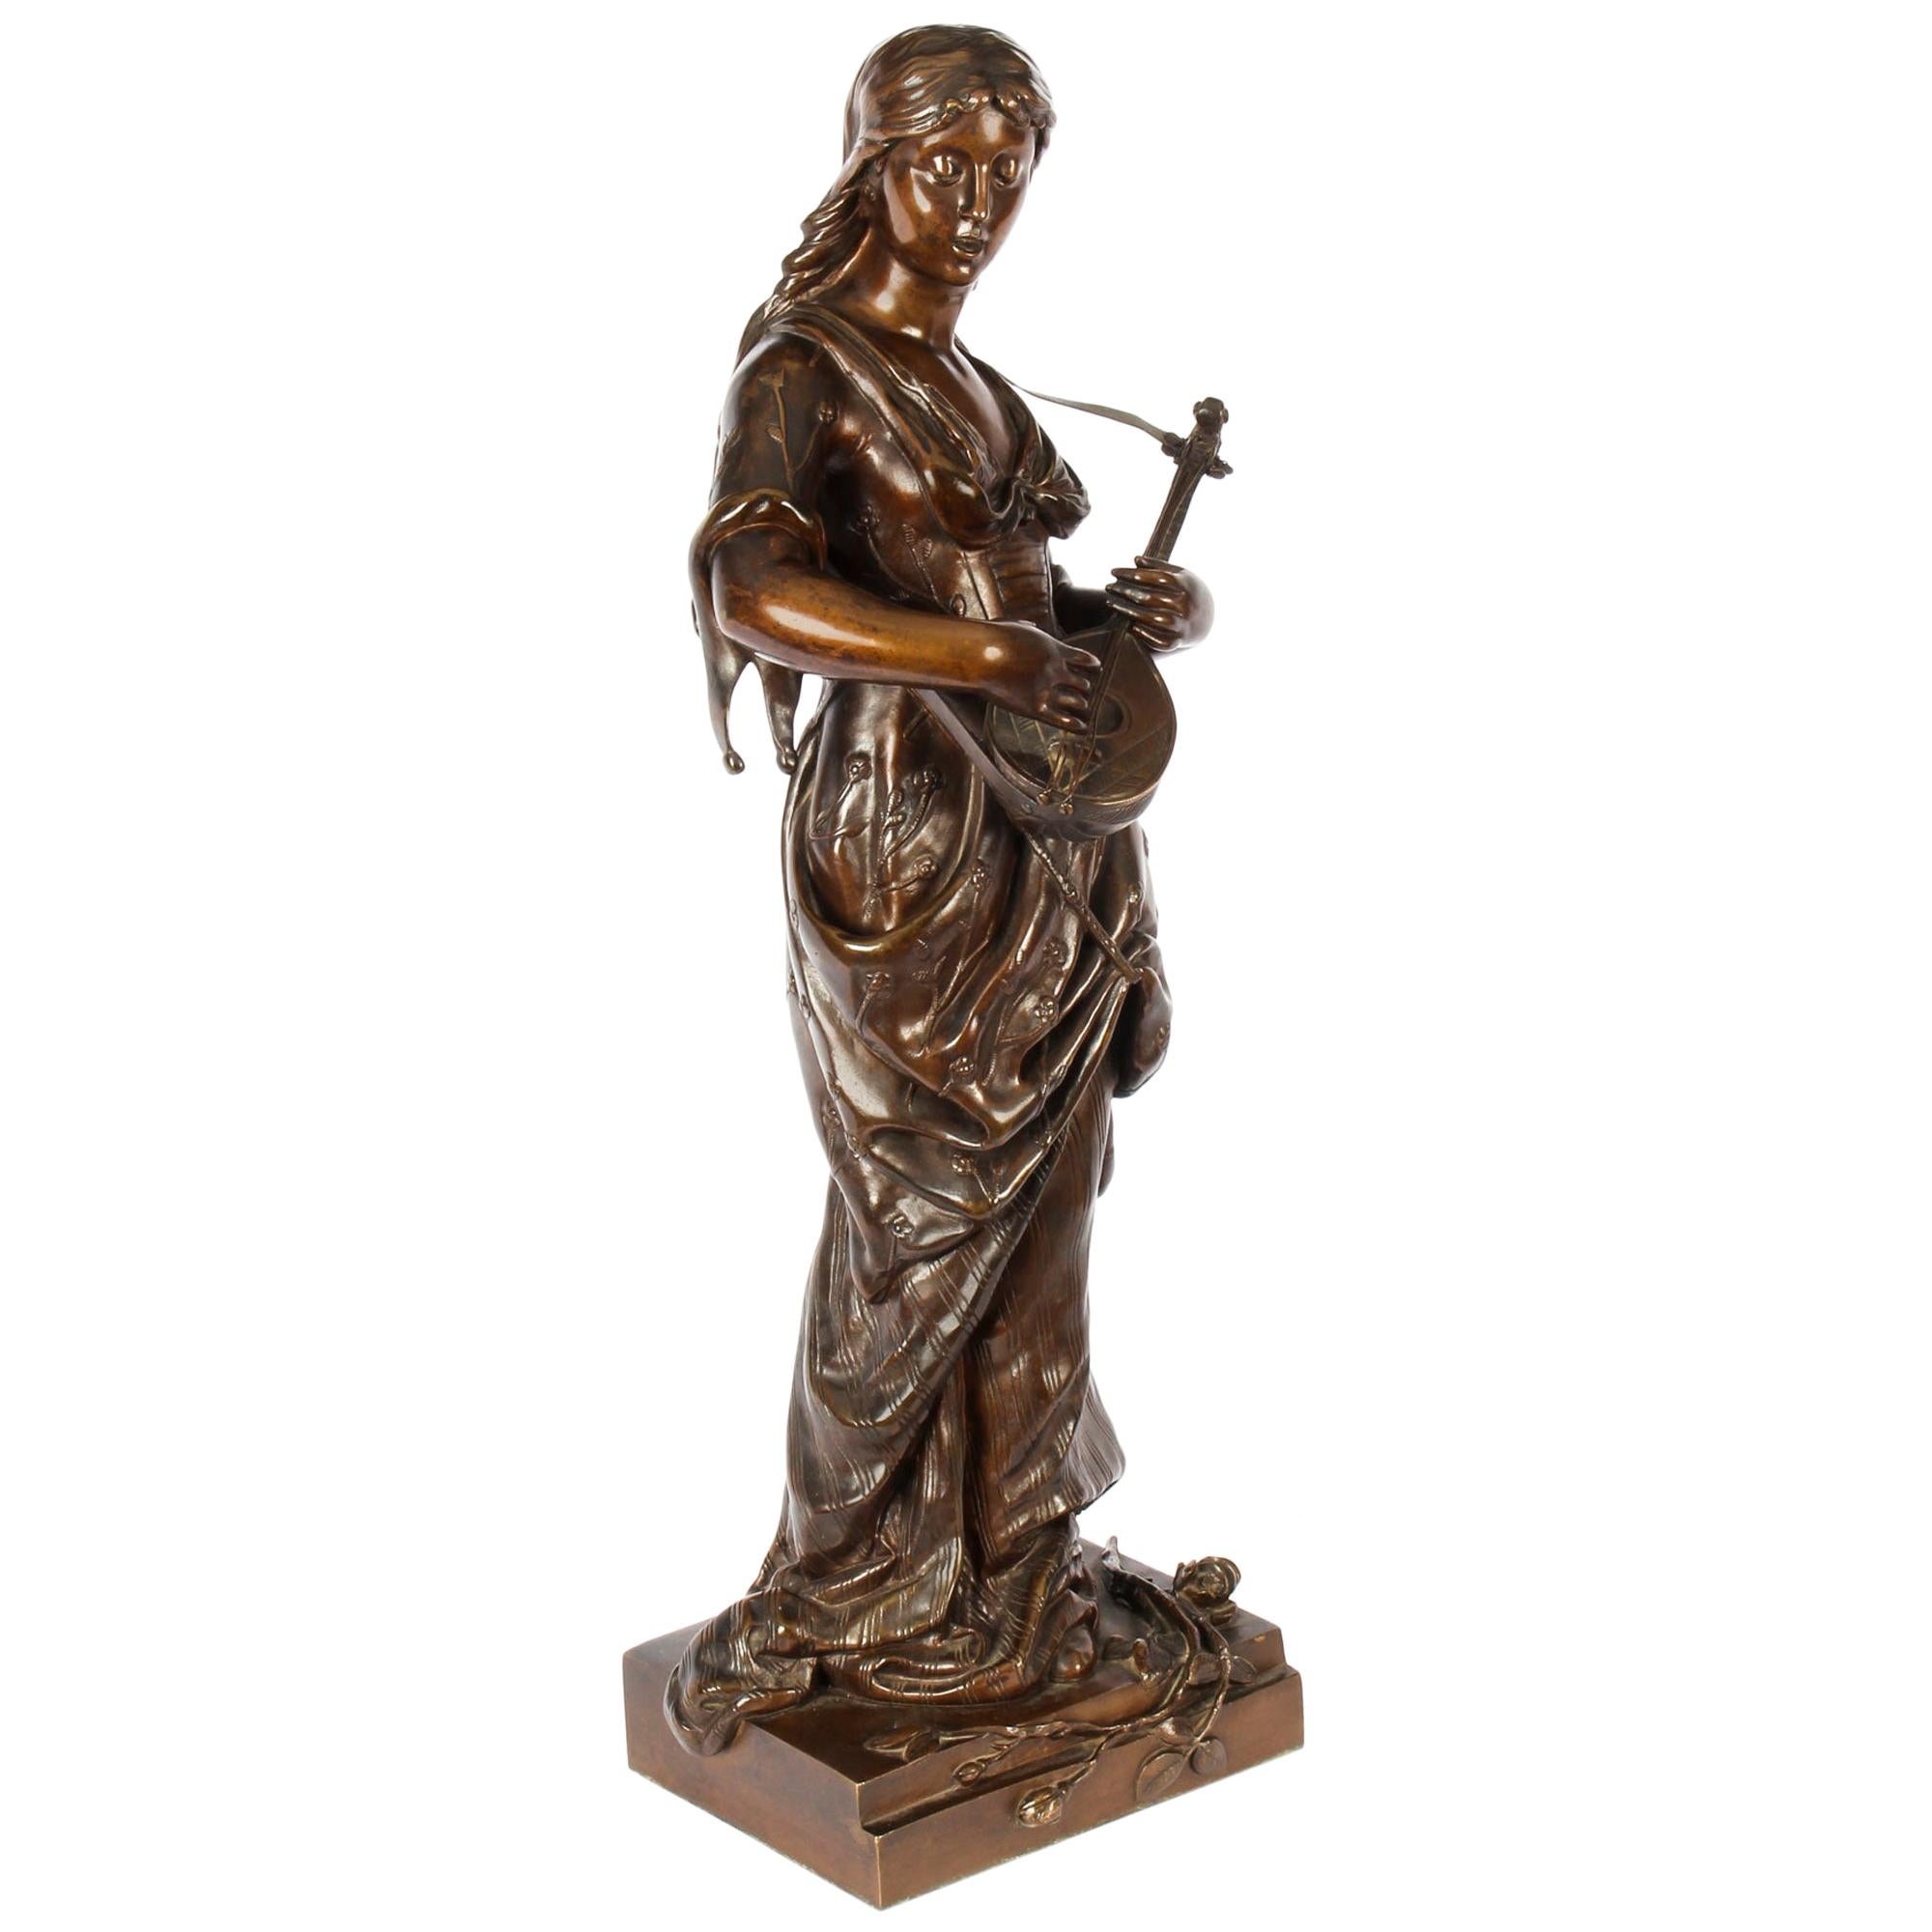 Antique Bronze Maiden Playing a Lute, by Albert Ernst Carrier, 19th Century